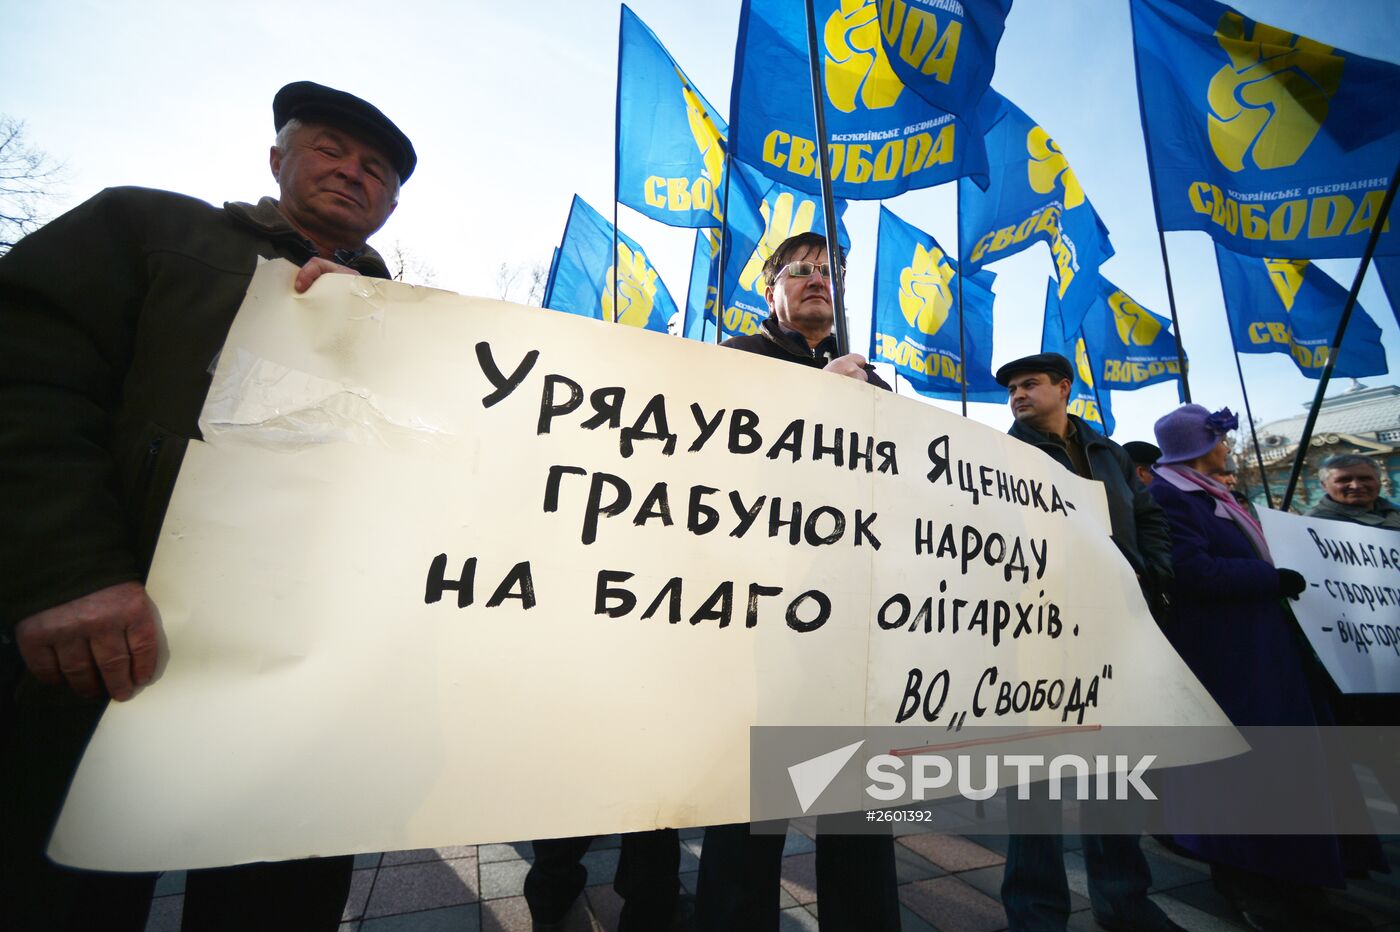 Freedom Party supporters stage rally in Kiev